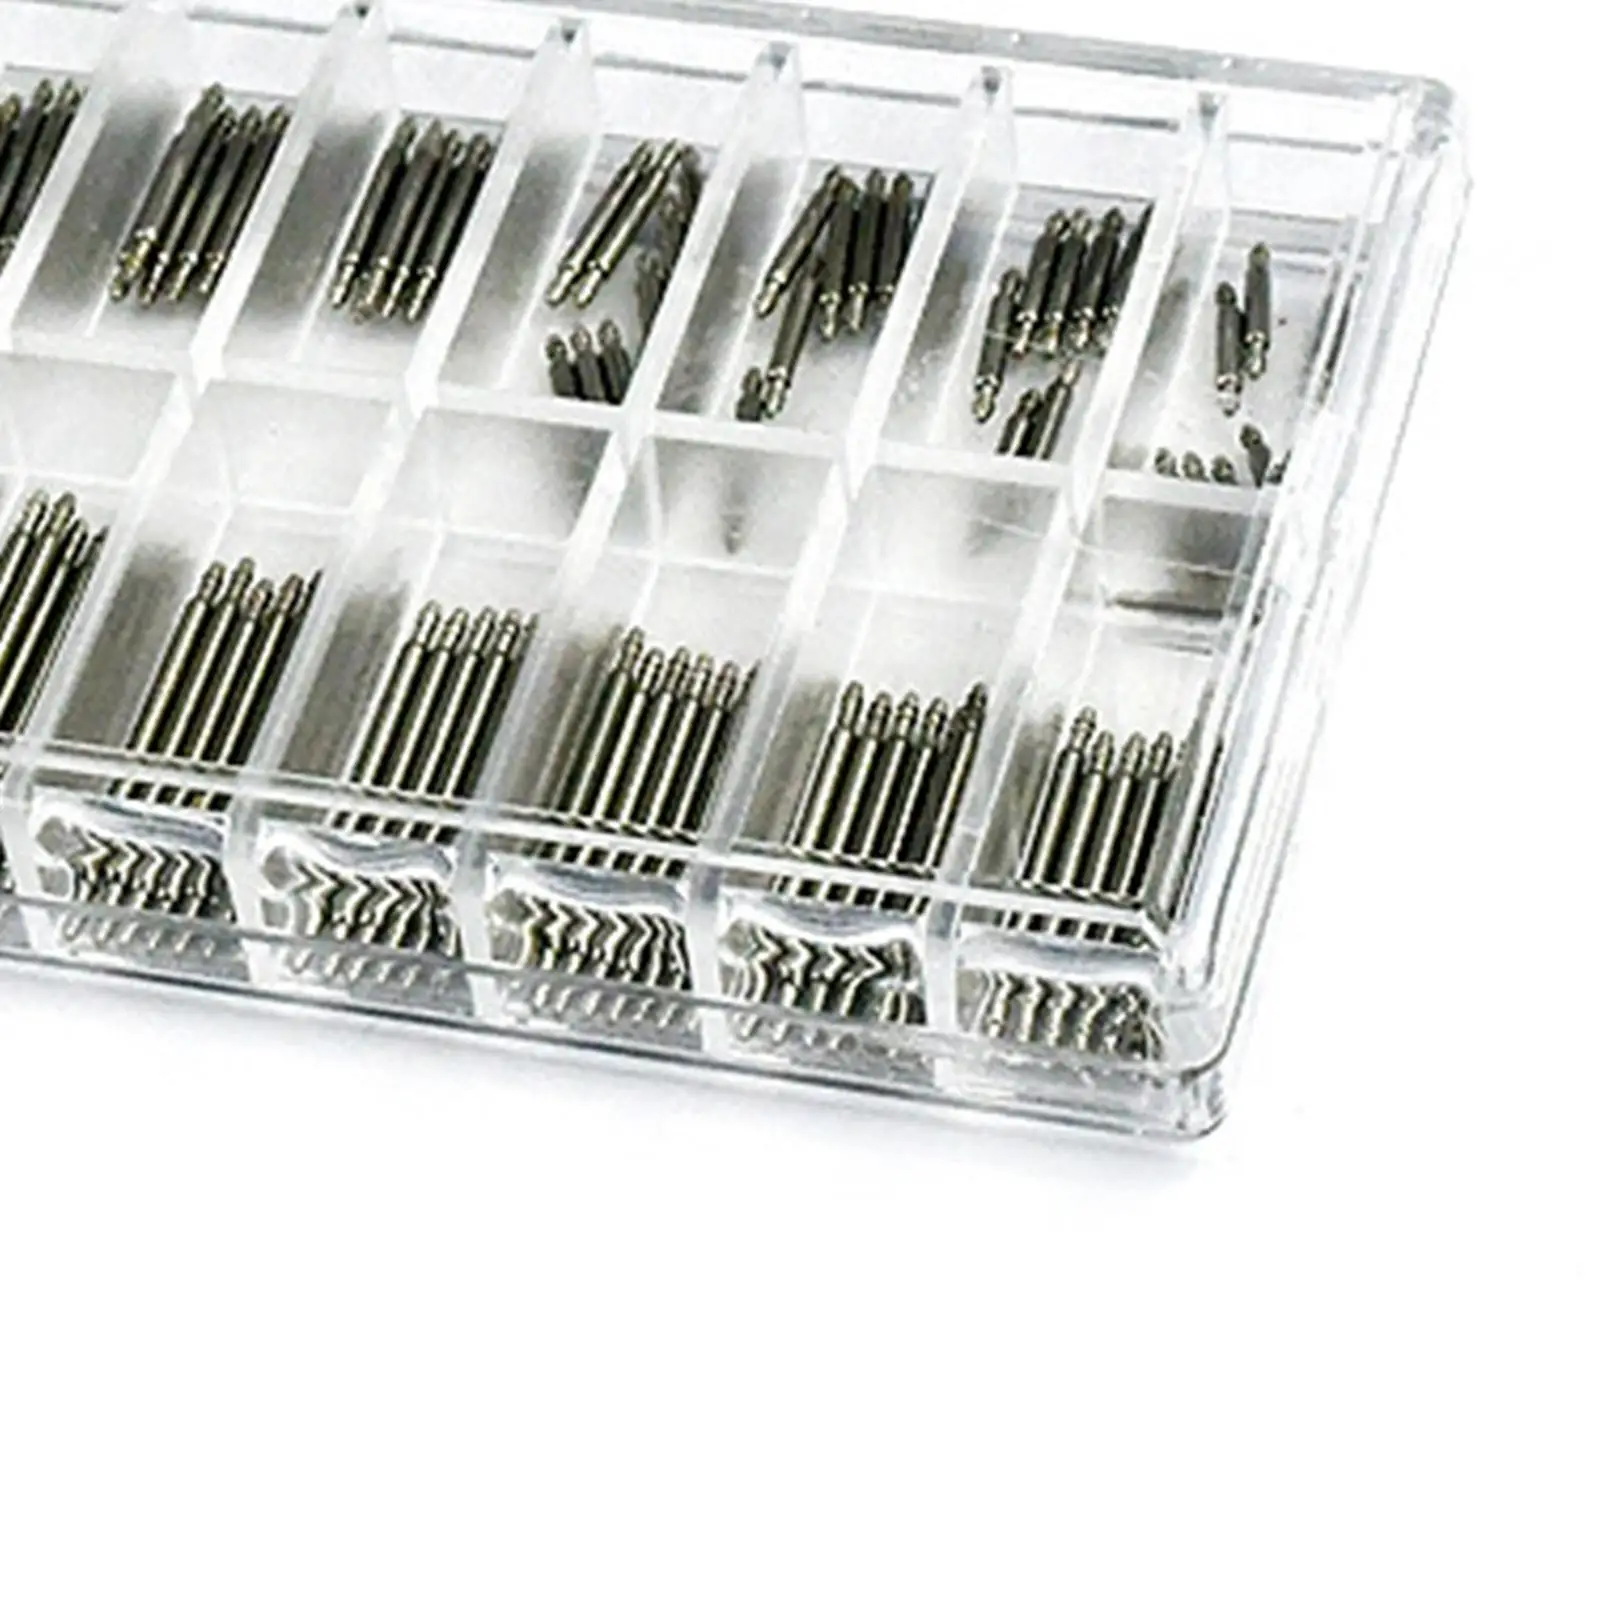 144x Stainless Steel Watch Band Spring Bars 8-25mm Repair 18 Different Sizes